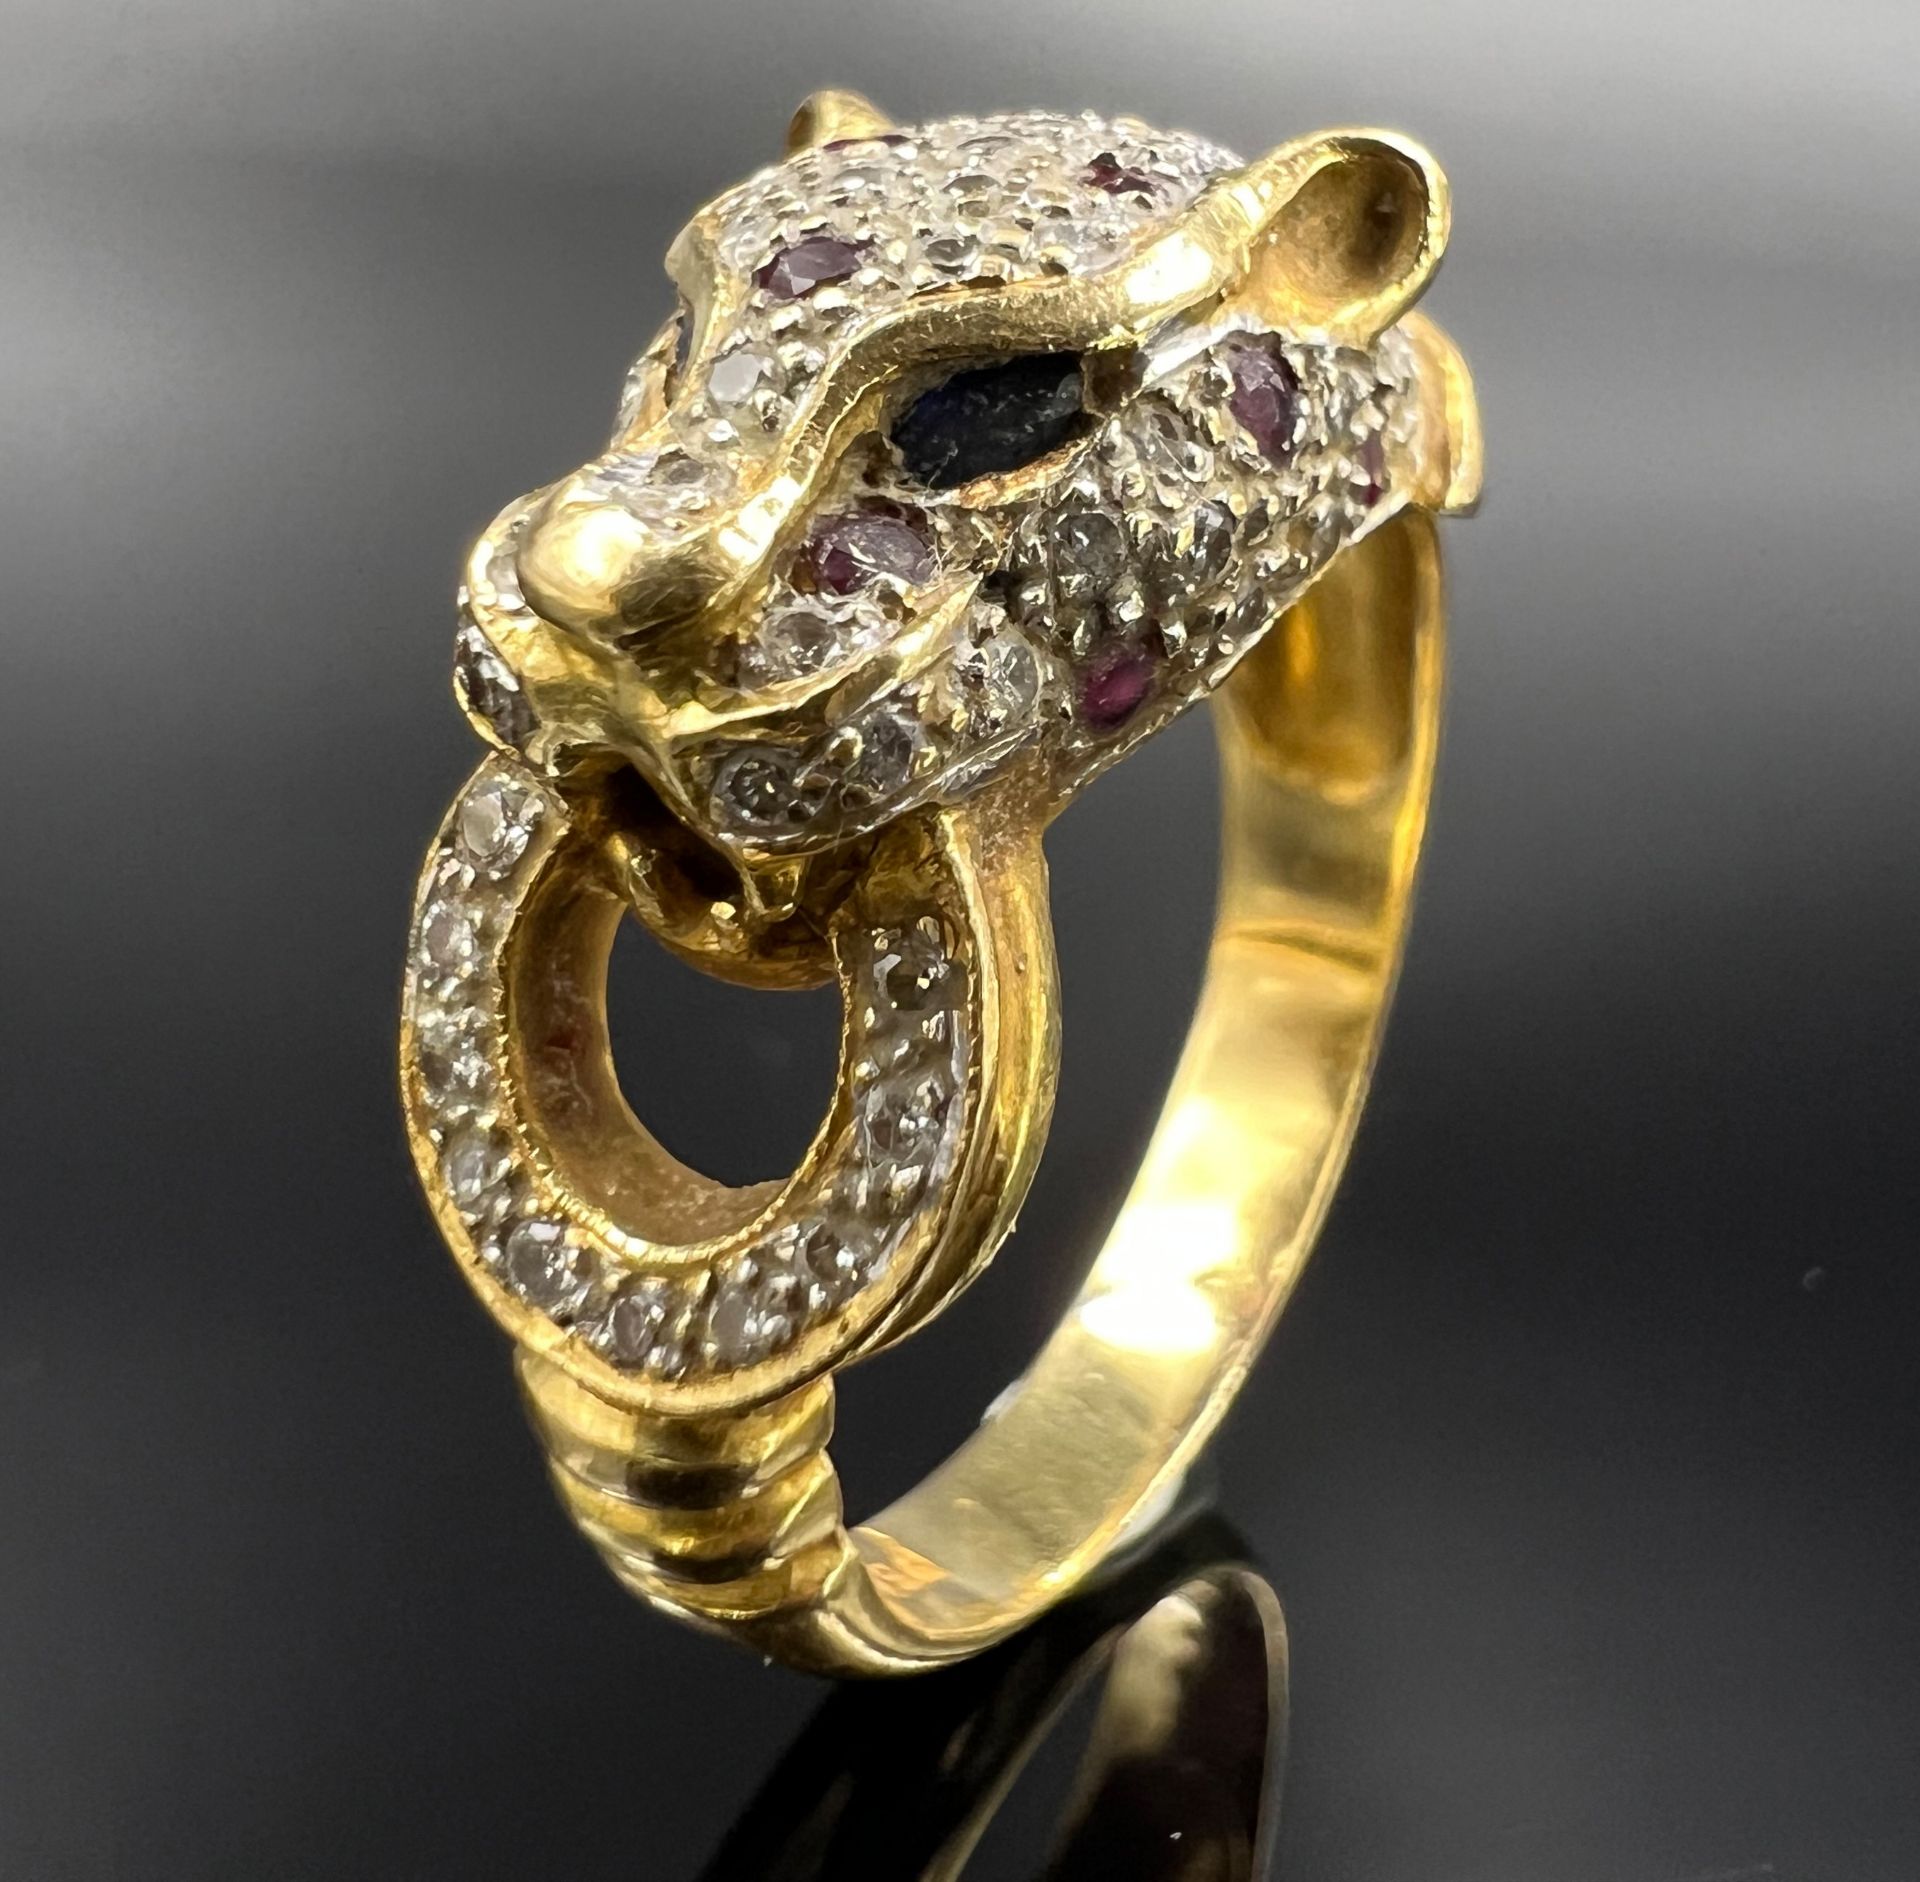 Ladies' ring "Cheetah". 750 yellow gold and white gold with gemstone setting. - Image 2 of 7